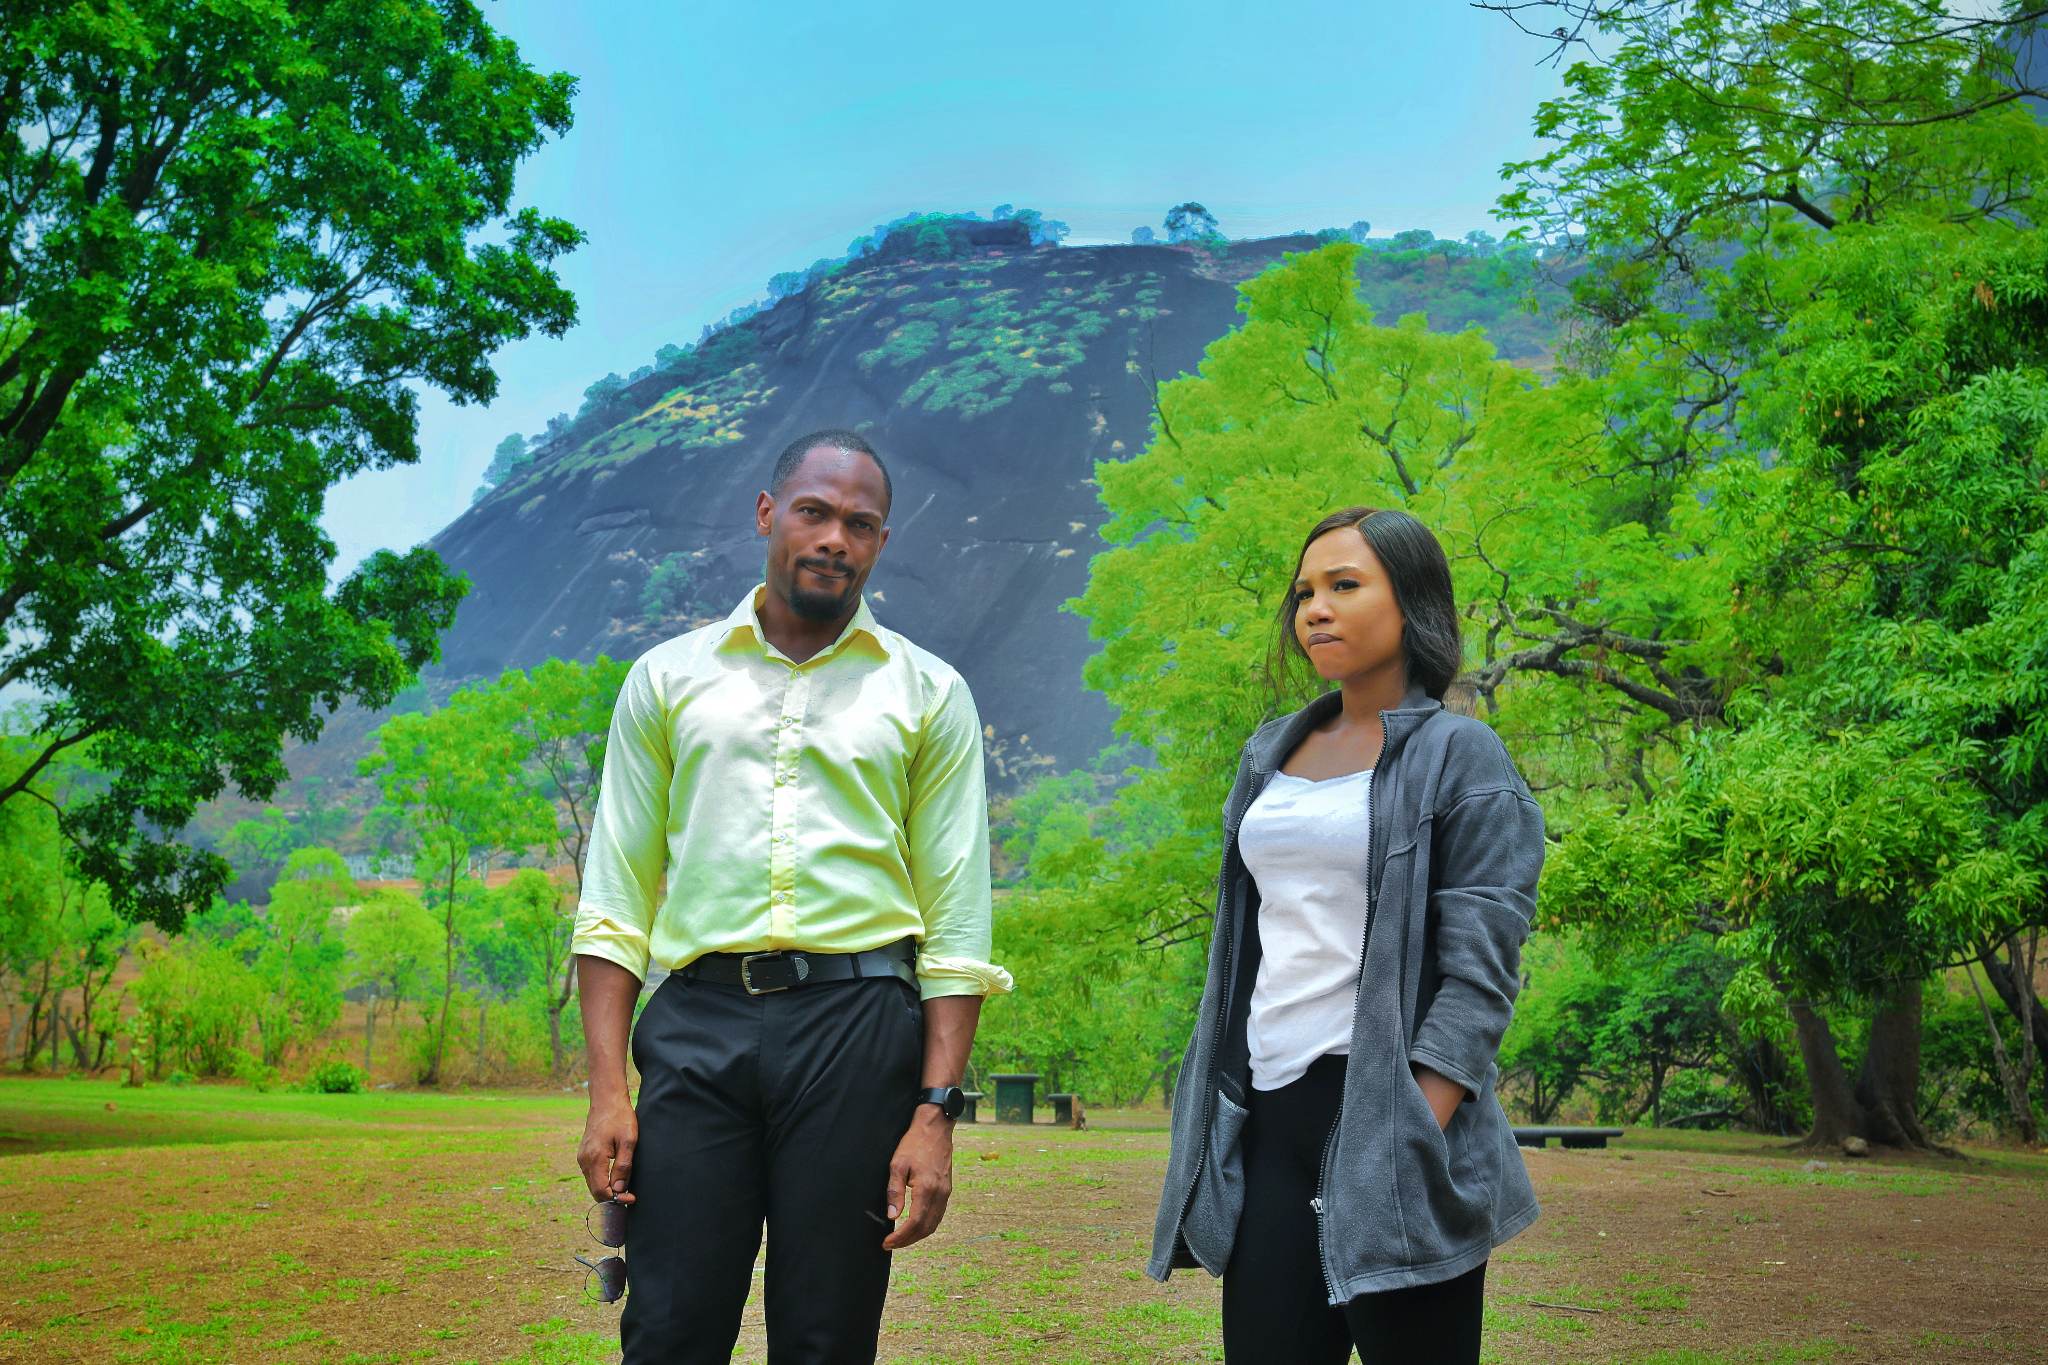 340111139 2016918815145481 1176945658173402080 n - Alt History Drama "A Land Apart" Directed By Bem Pever Begins Principal Photography in Abuja